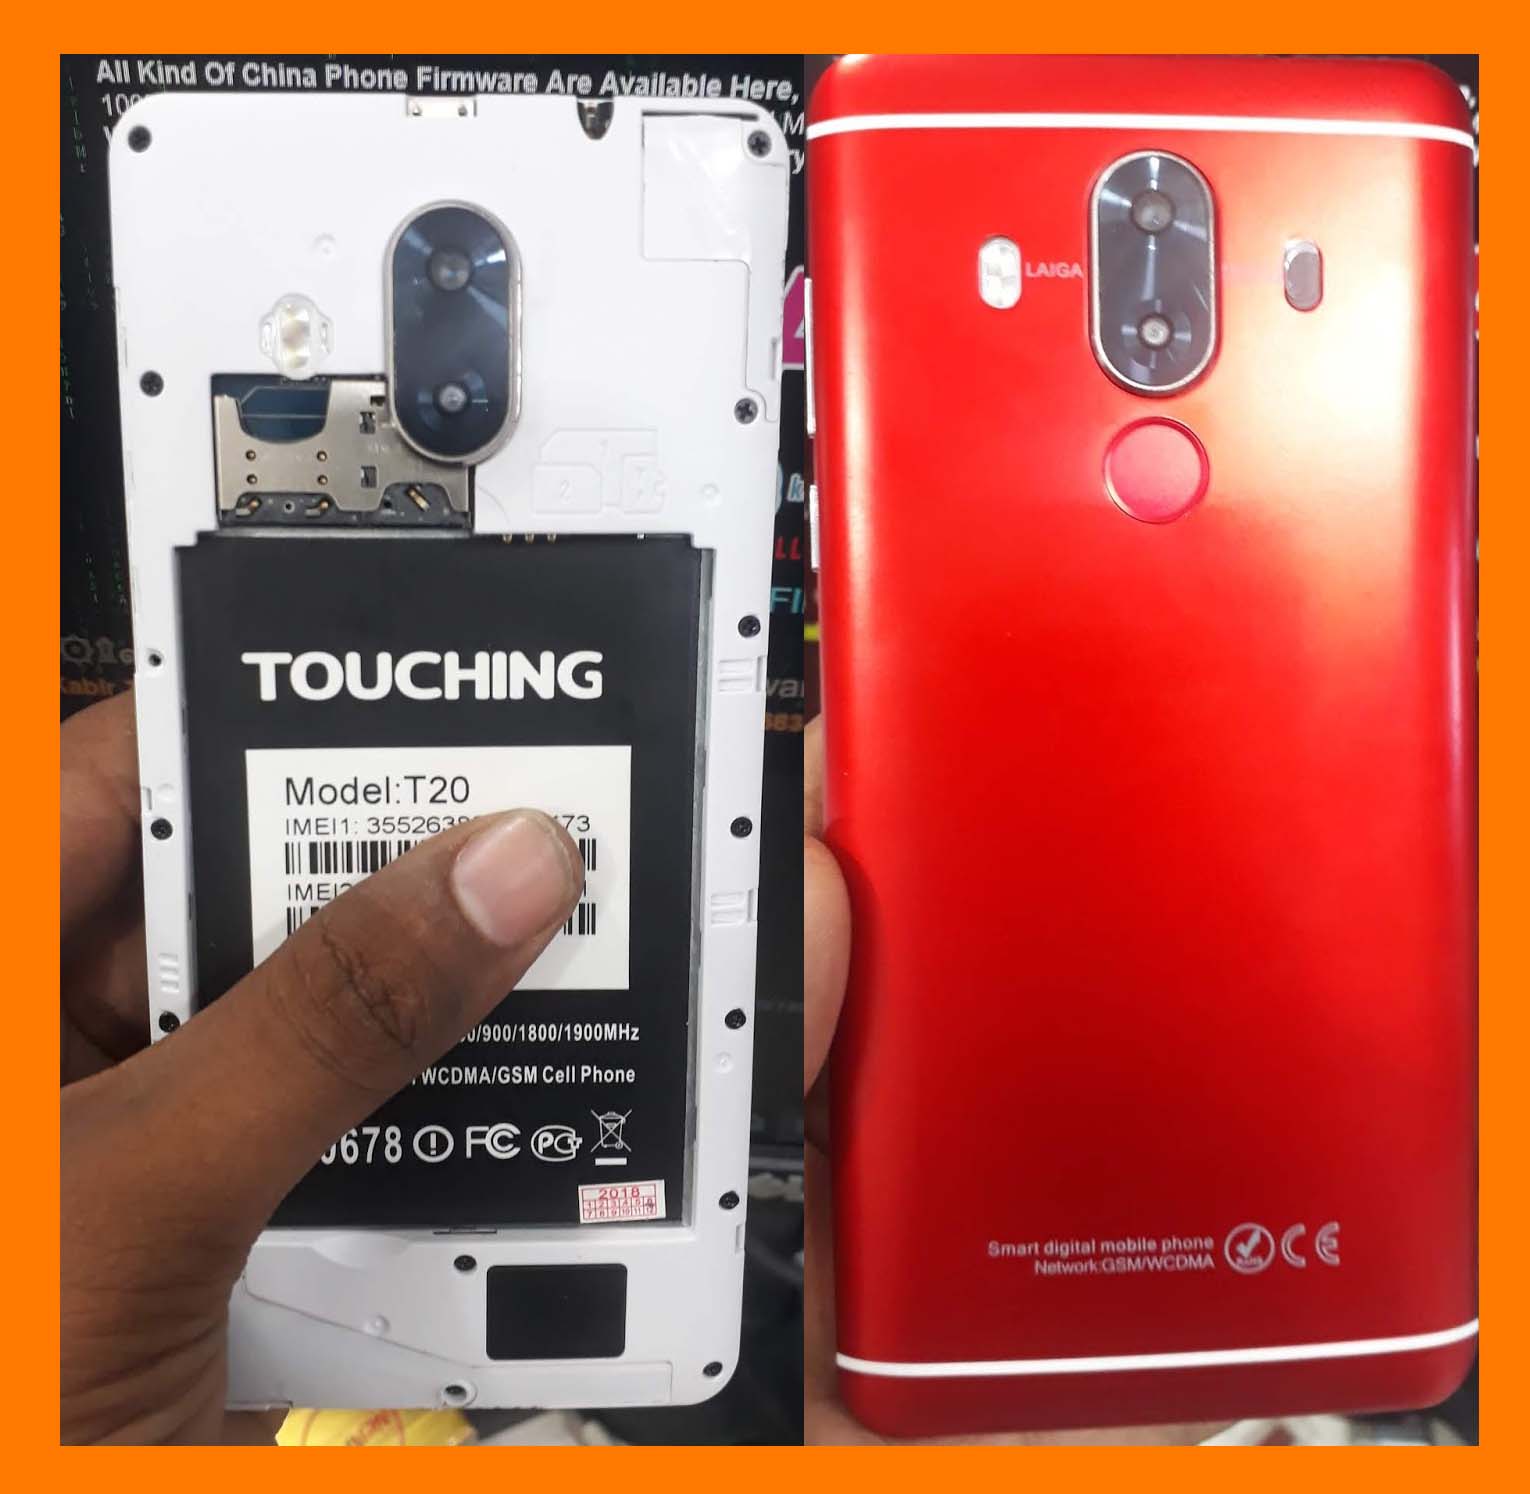 Touching T20 Flash File Firmware 5.1 MT6580